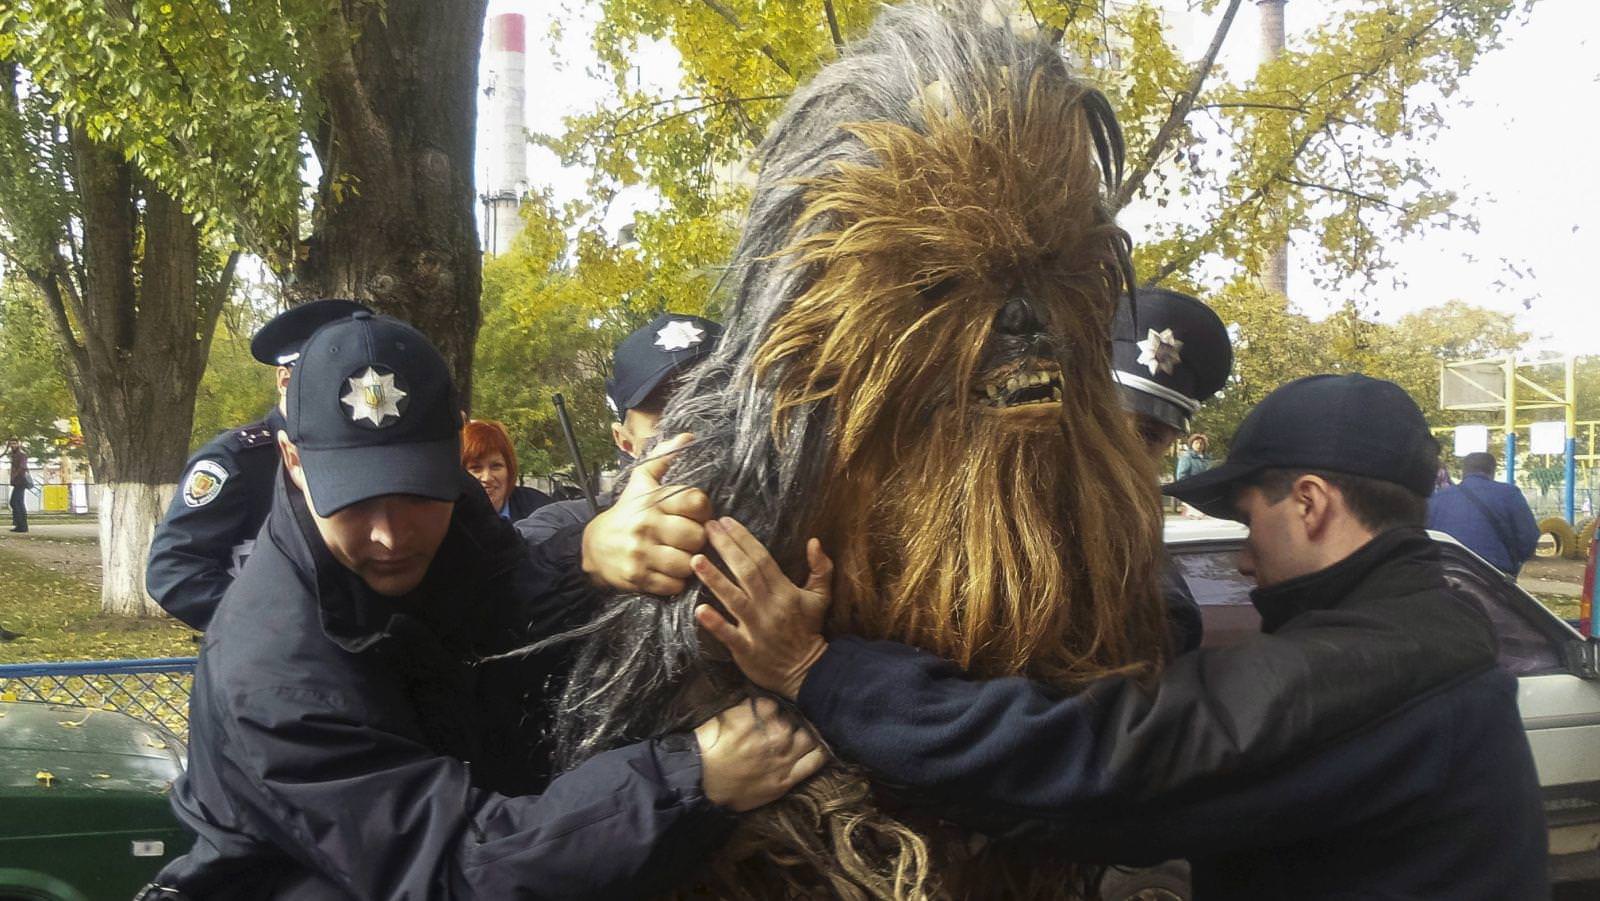 Chewbacca Arrested For Illegally Campaigning for Darth Vader